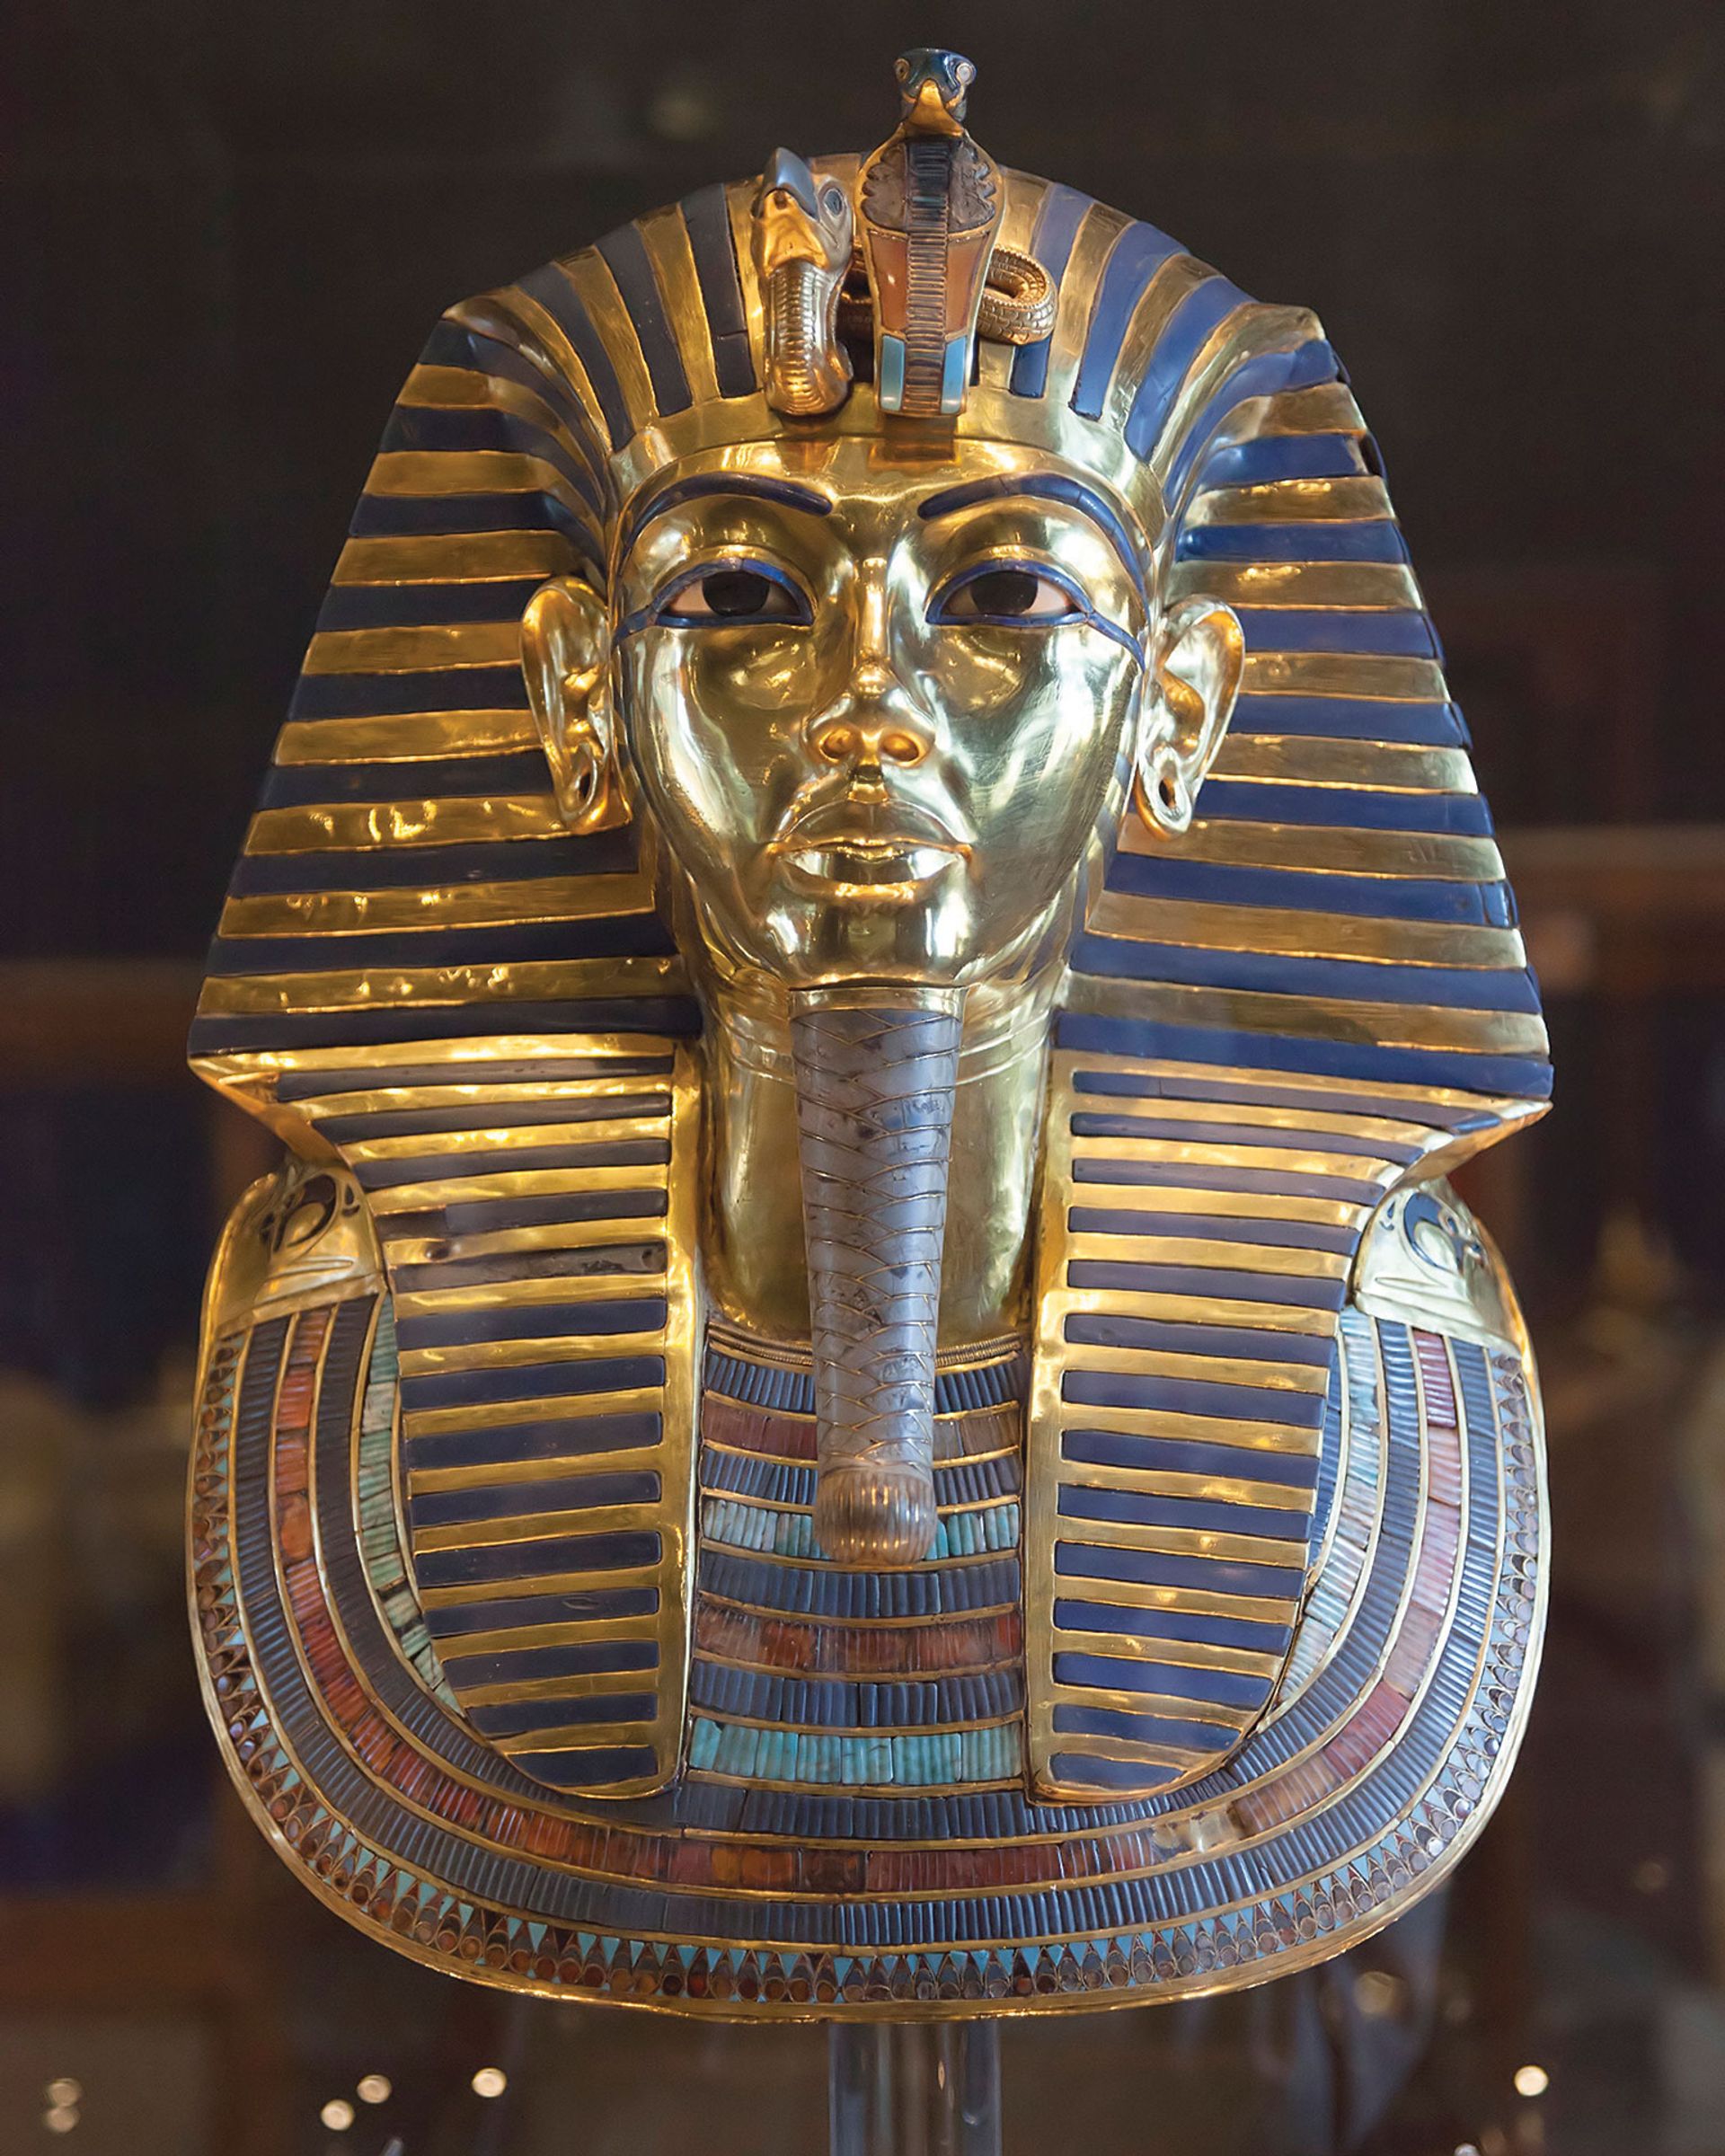 Tutankhamun’s 3,300-year-old mask. Damage to the headdress suggests an ancient accident, when the mummy may have fallen over in a funeral ritual Photo: Roland Unger